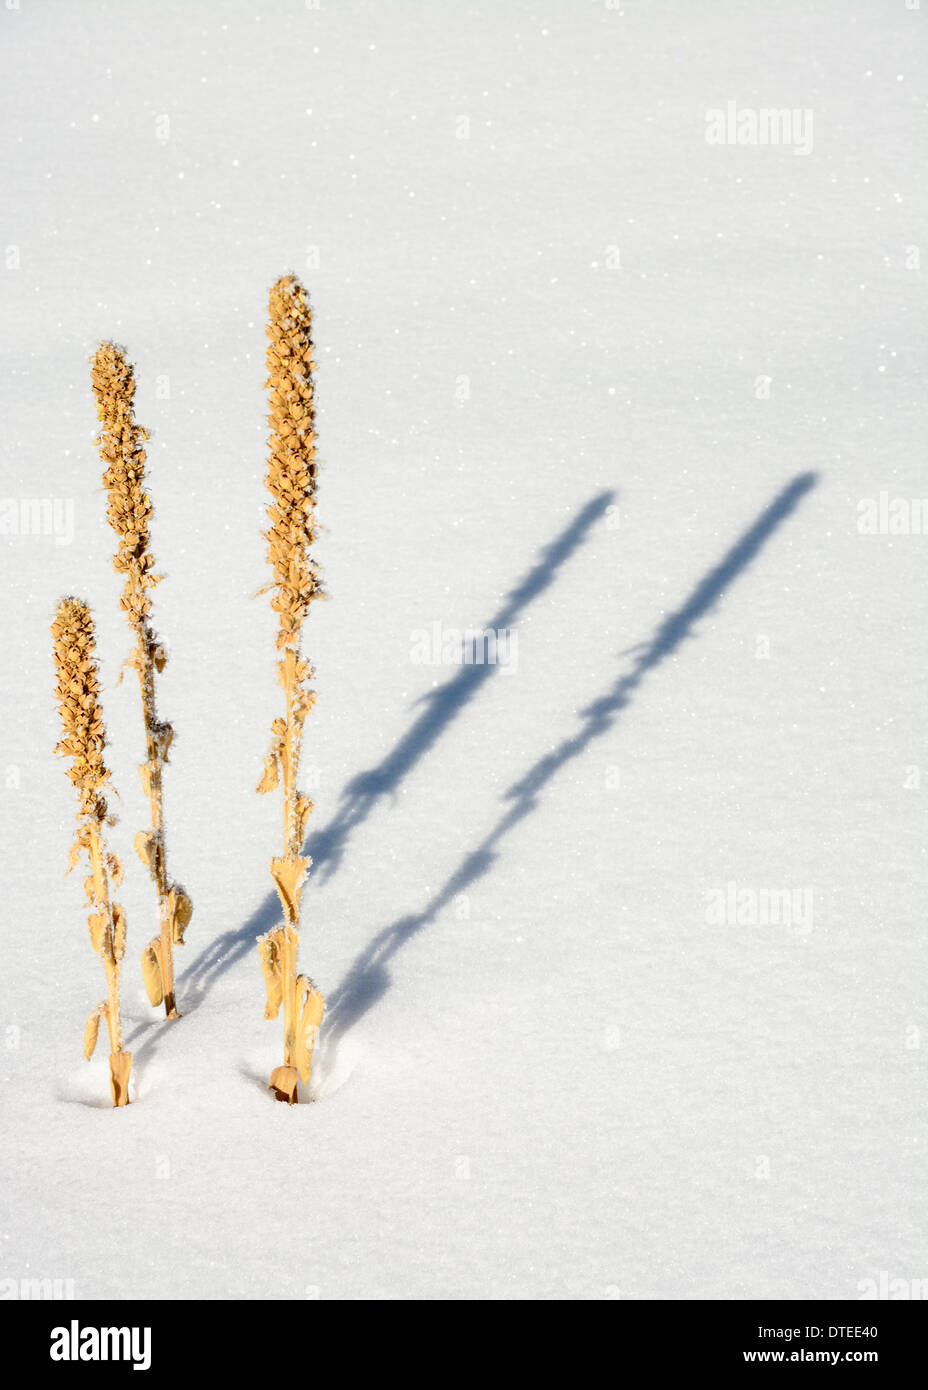 Three weeds in nature winter with snow Stock Photo